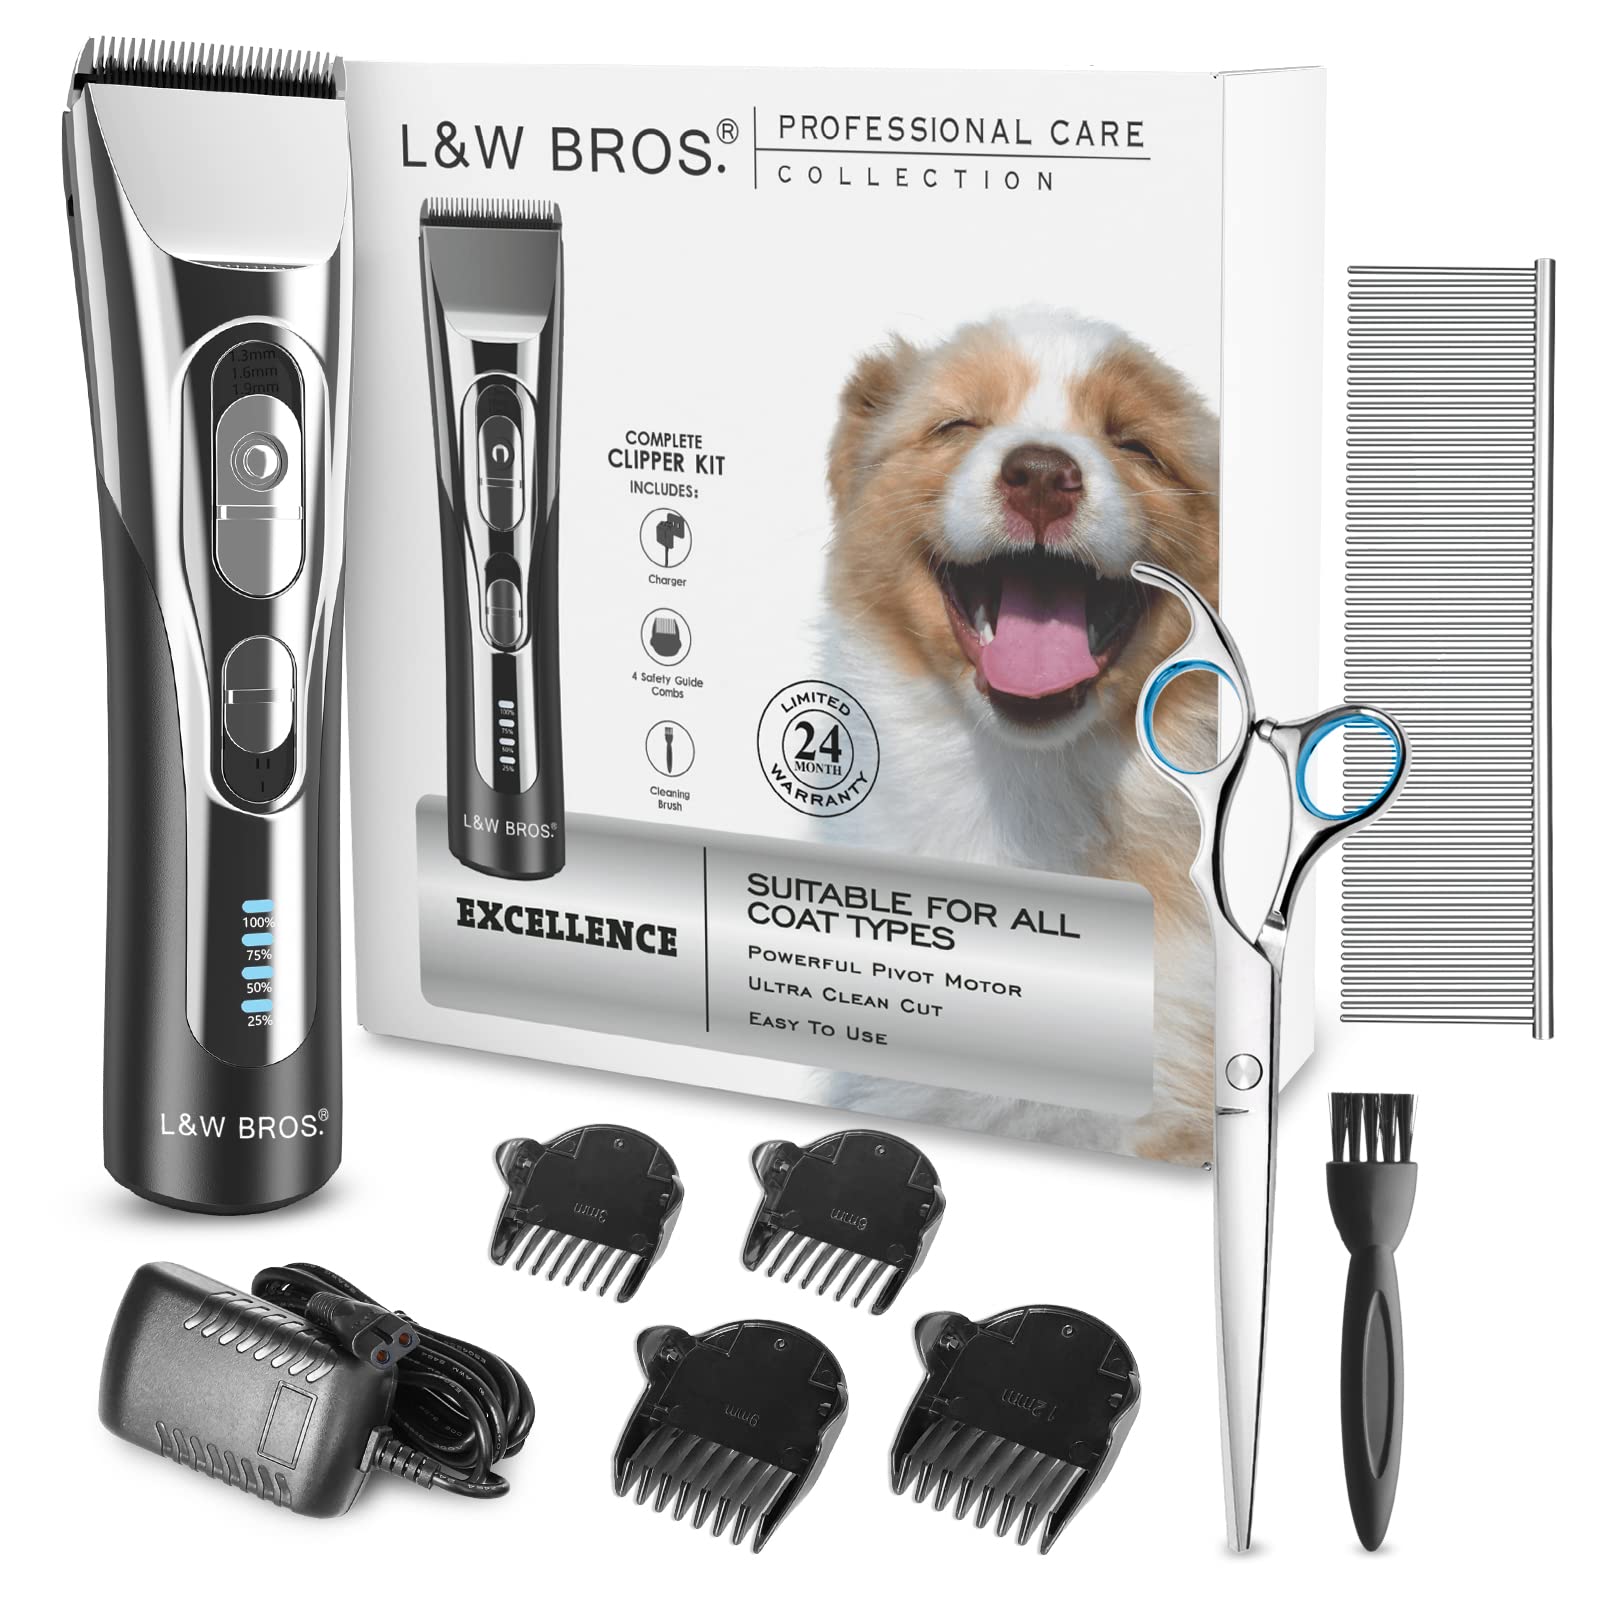 L&W BROS. Professional Dog Grooming Clippers, Cordless Dog Clippers for Grooming, Pet Clippers for Dogs Thick Hair Low Noise